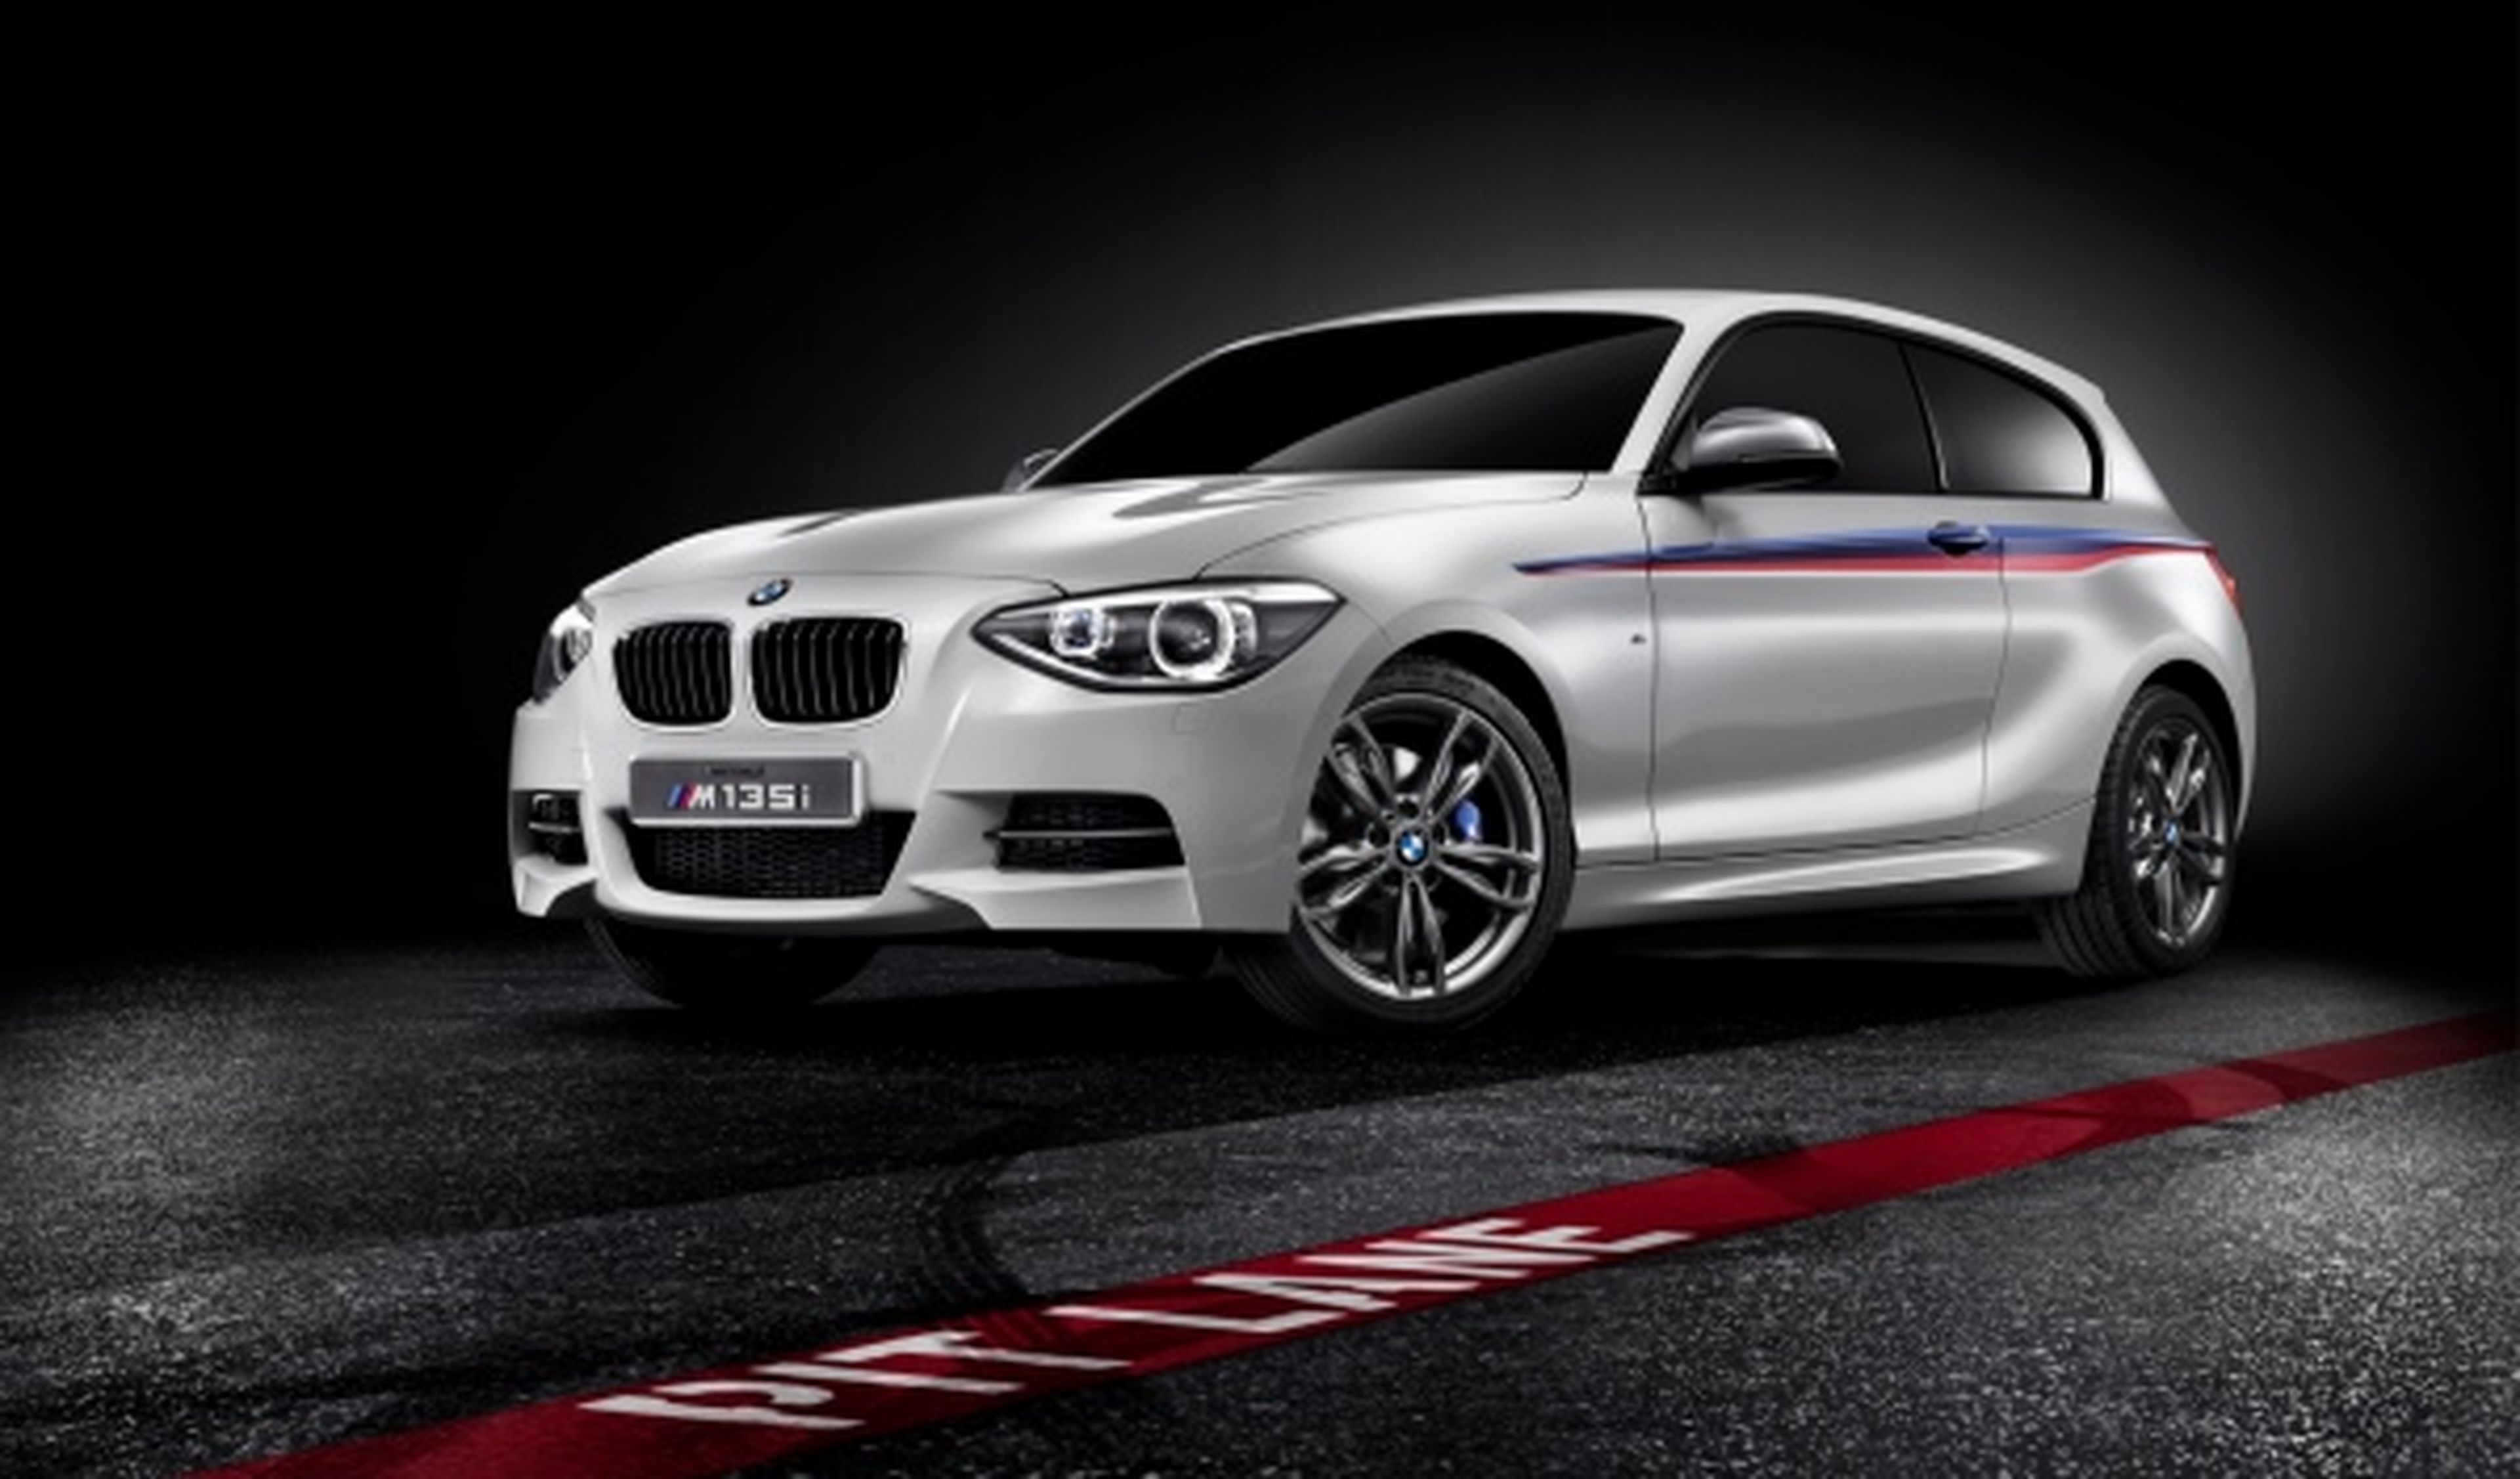 BMW Concept M135i frontal